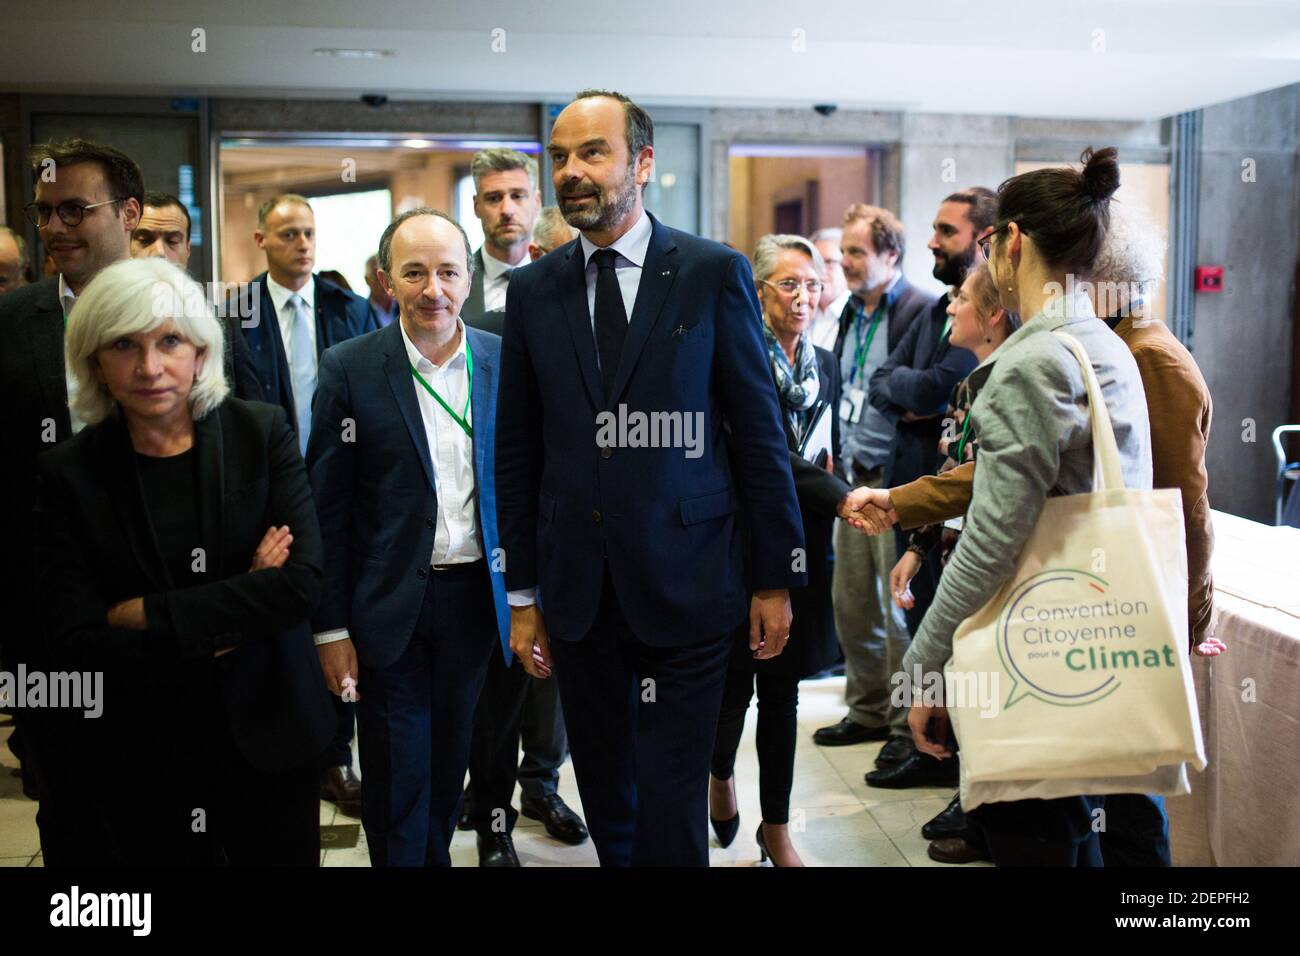 Fench Prime Minister Edouard Philippe, Economist Laurence Tubiana and Thierry Pech arrive at the Citizens' Convention for Climate held at the French Conseil economique, social et environnemental (CESE - Economic, Social and Environmental Council) in Paris, 04 October 2019 Photo by Raphaël Lafargue/ABACAPRESS.COM Stock Photo